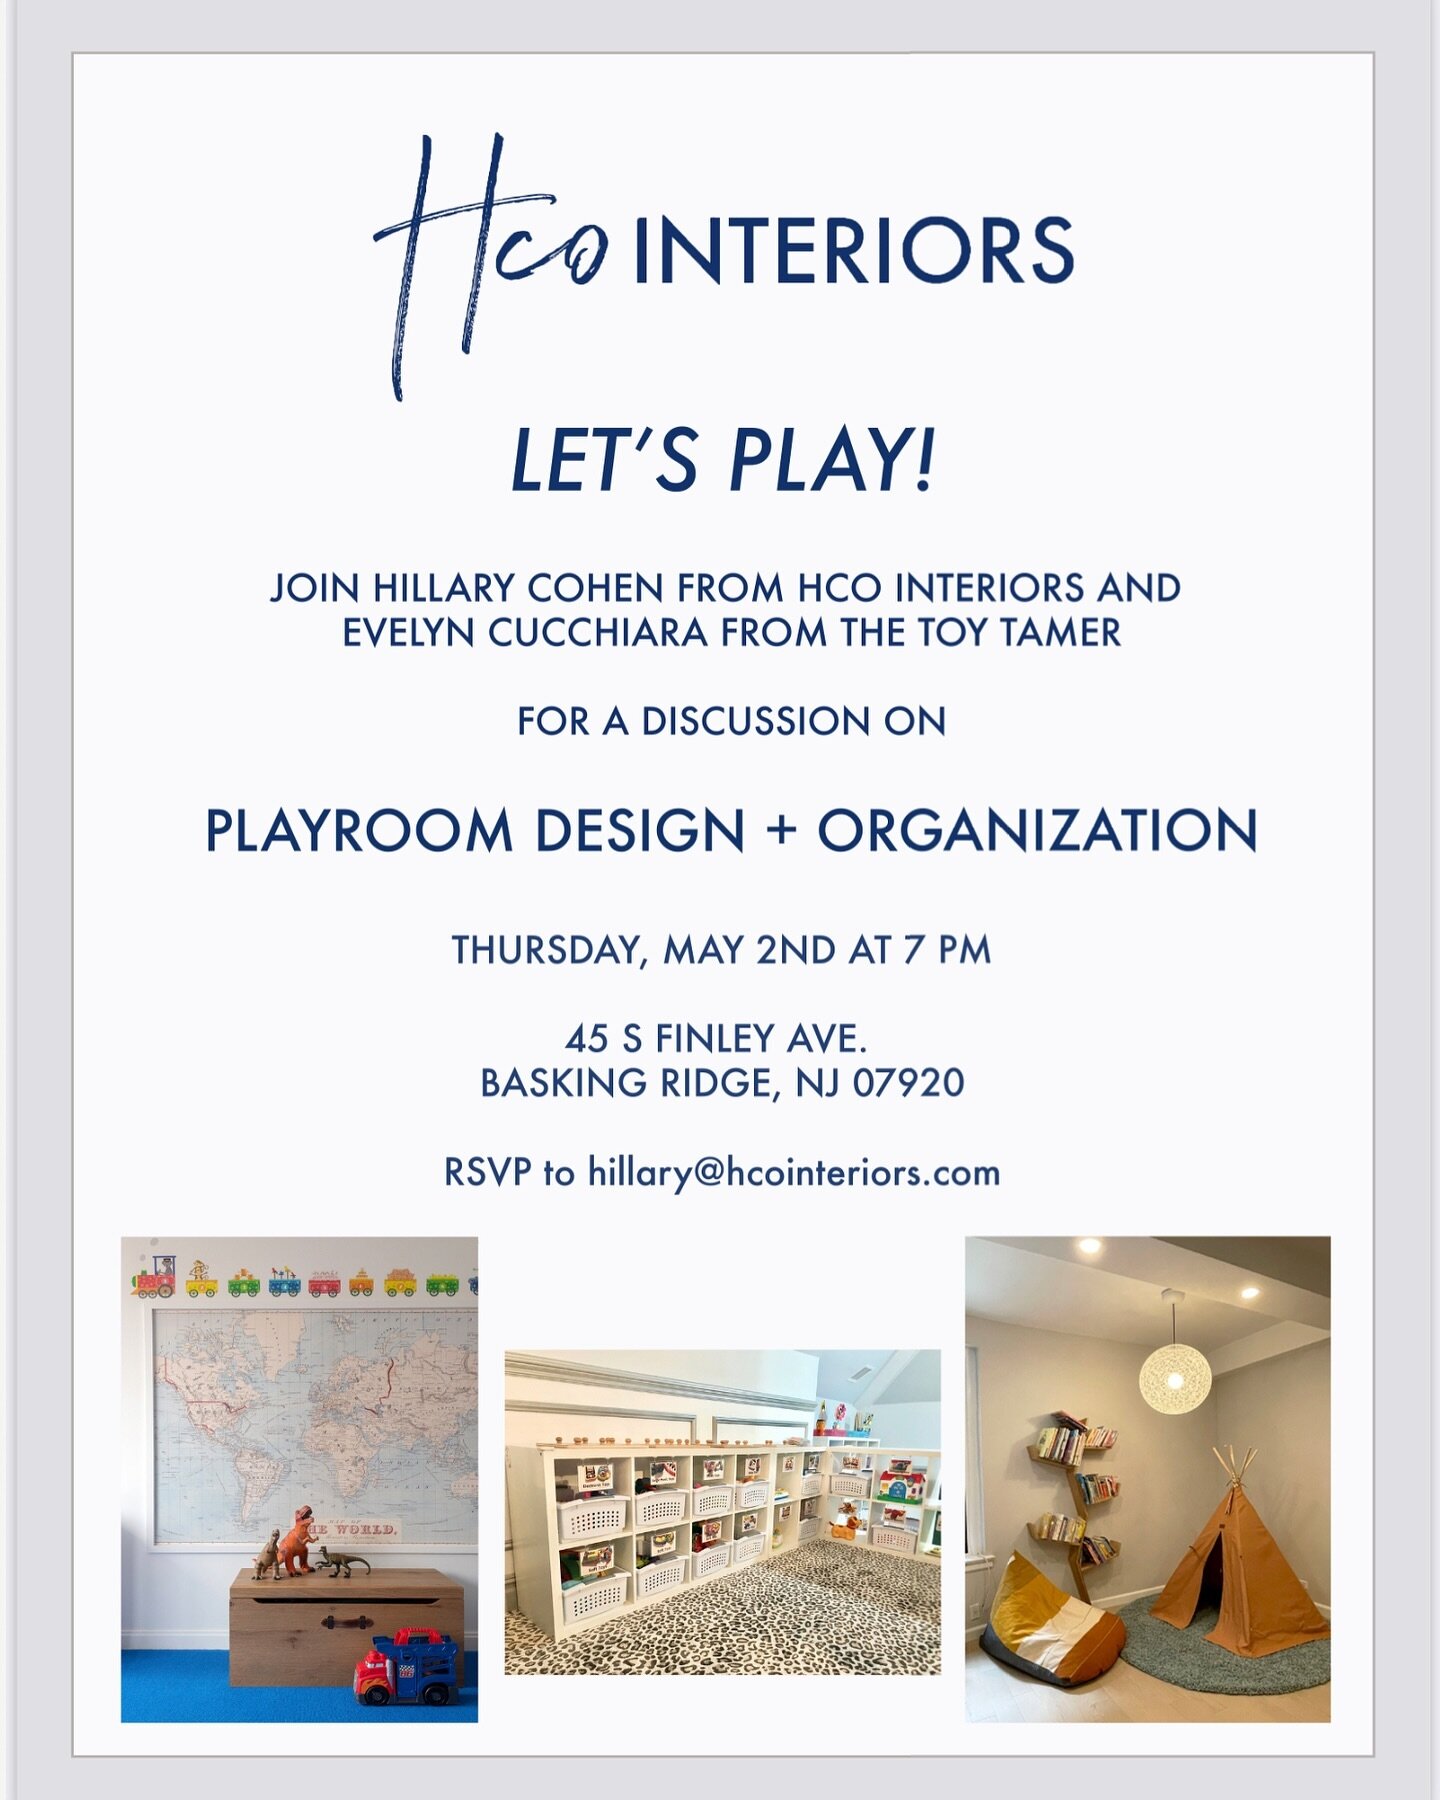 We are hosting a free event our design studio in downtown Basking Ridge - please see the flyer and reach out if you are interested in attending!